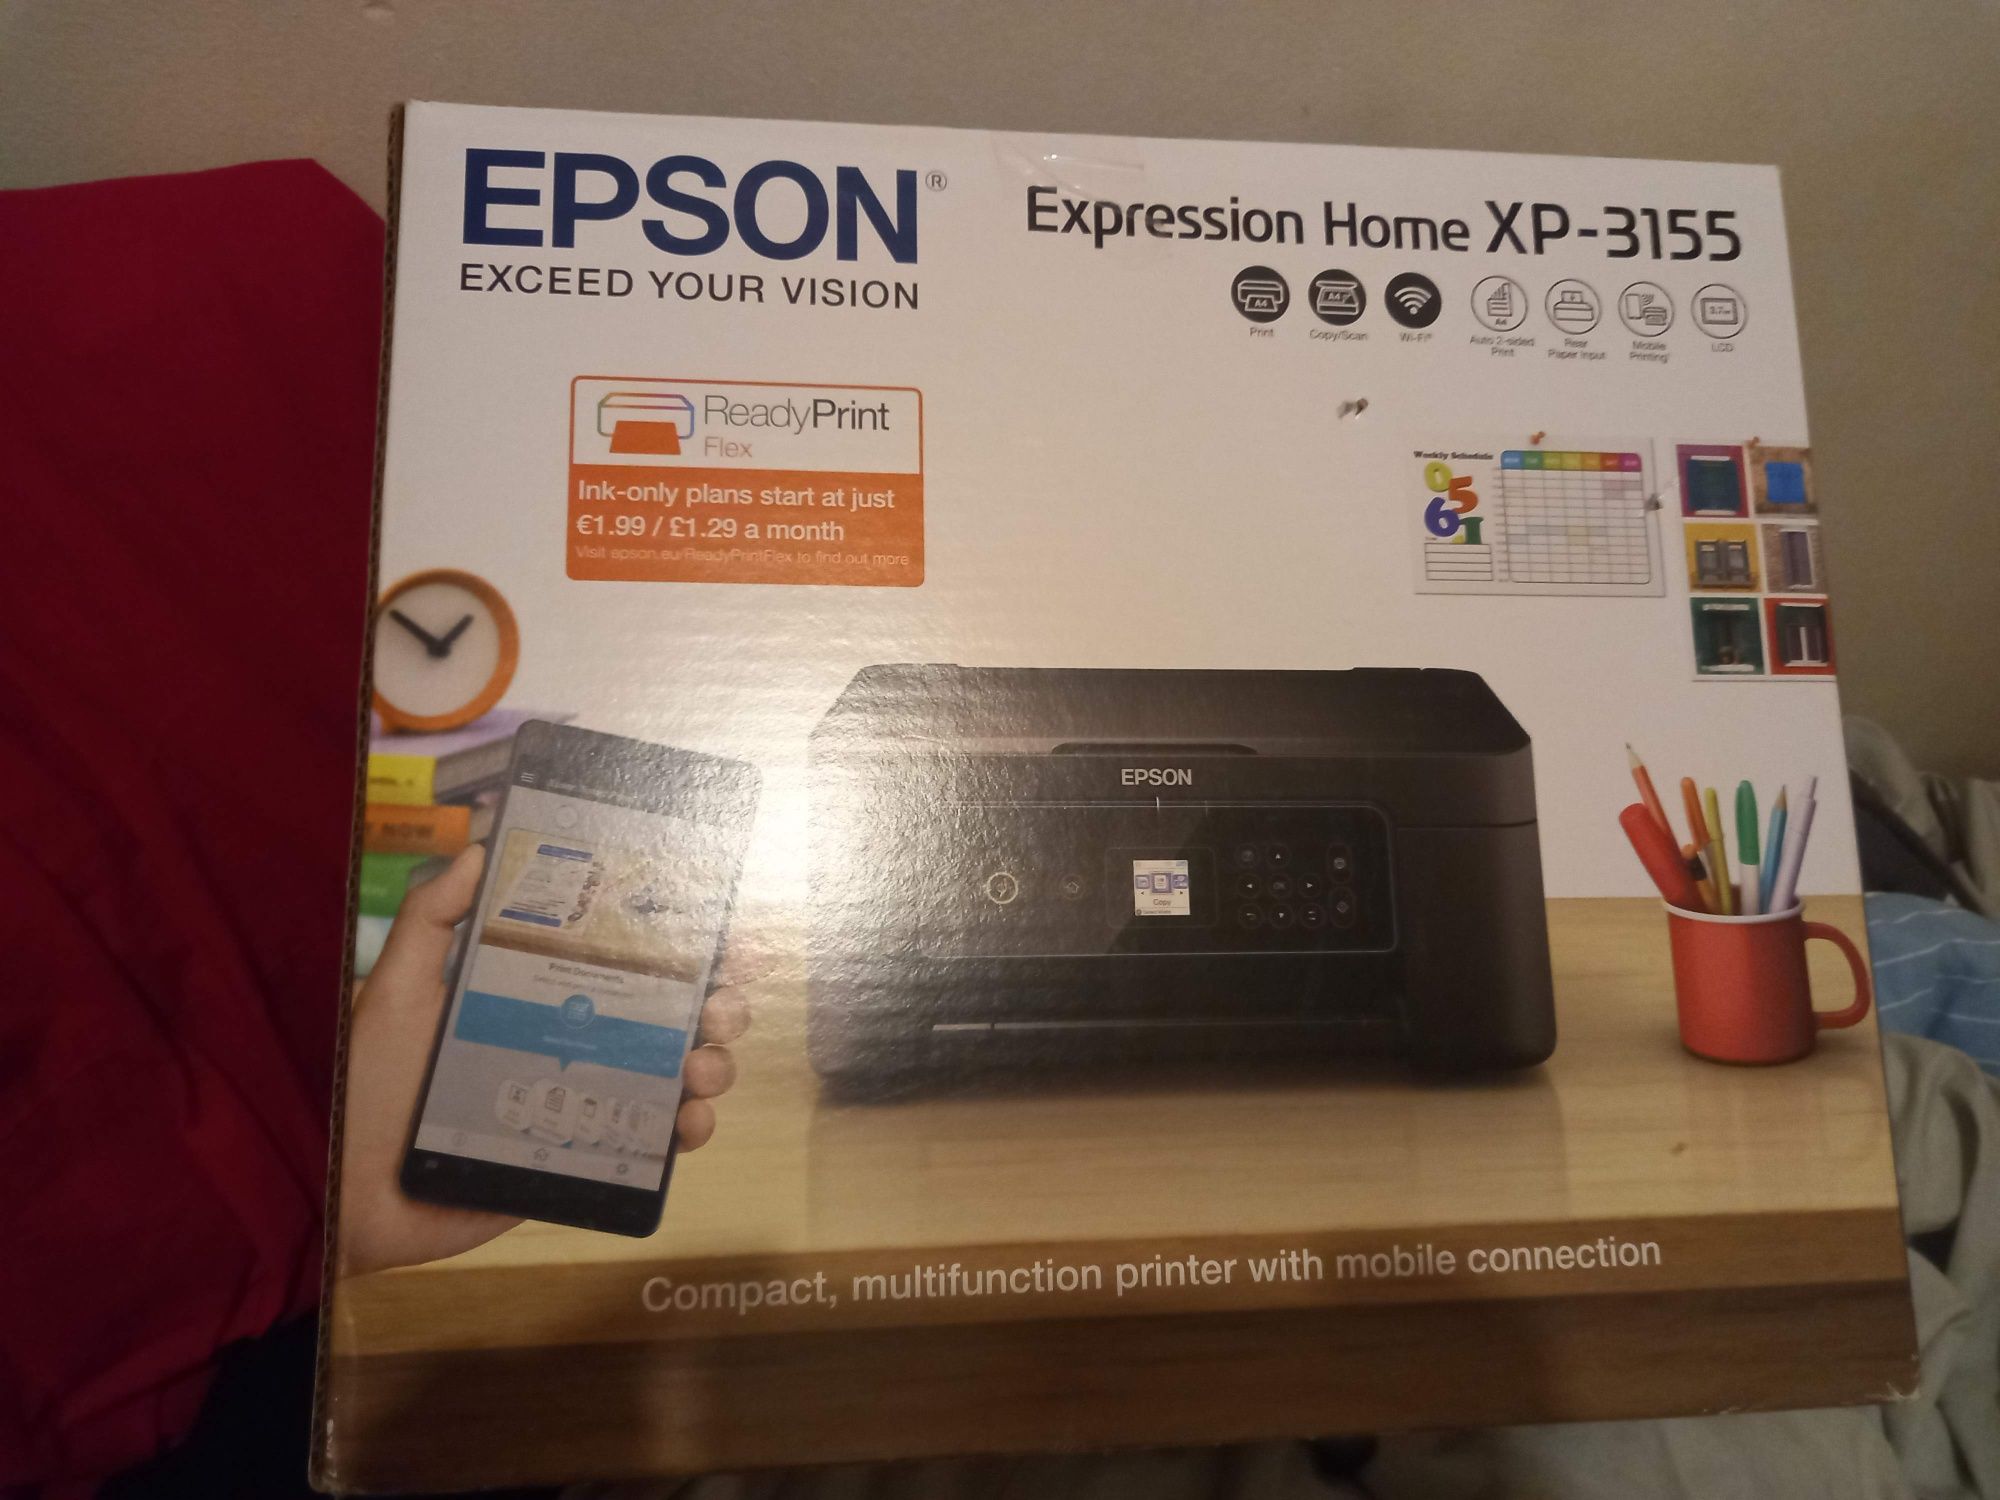 epson expression home xp-3155